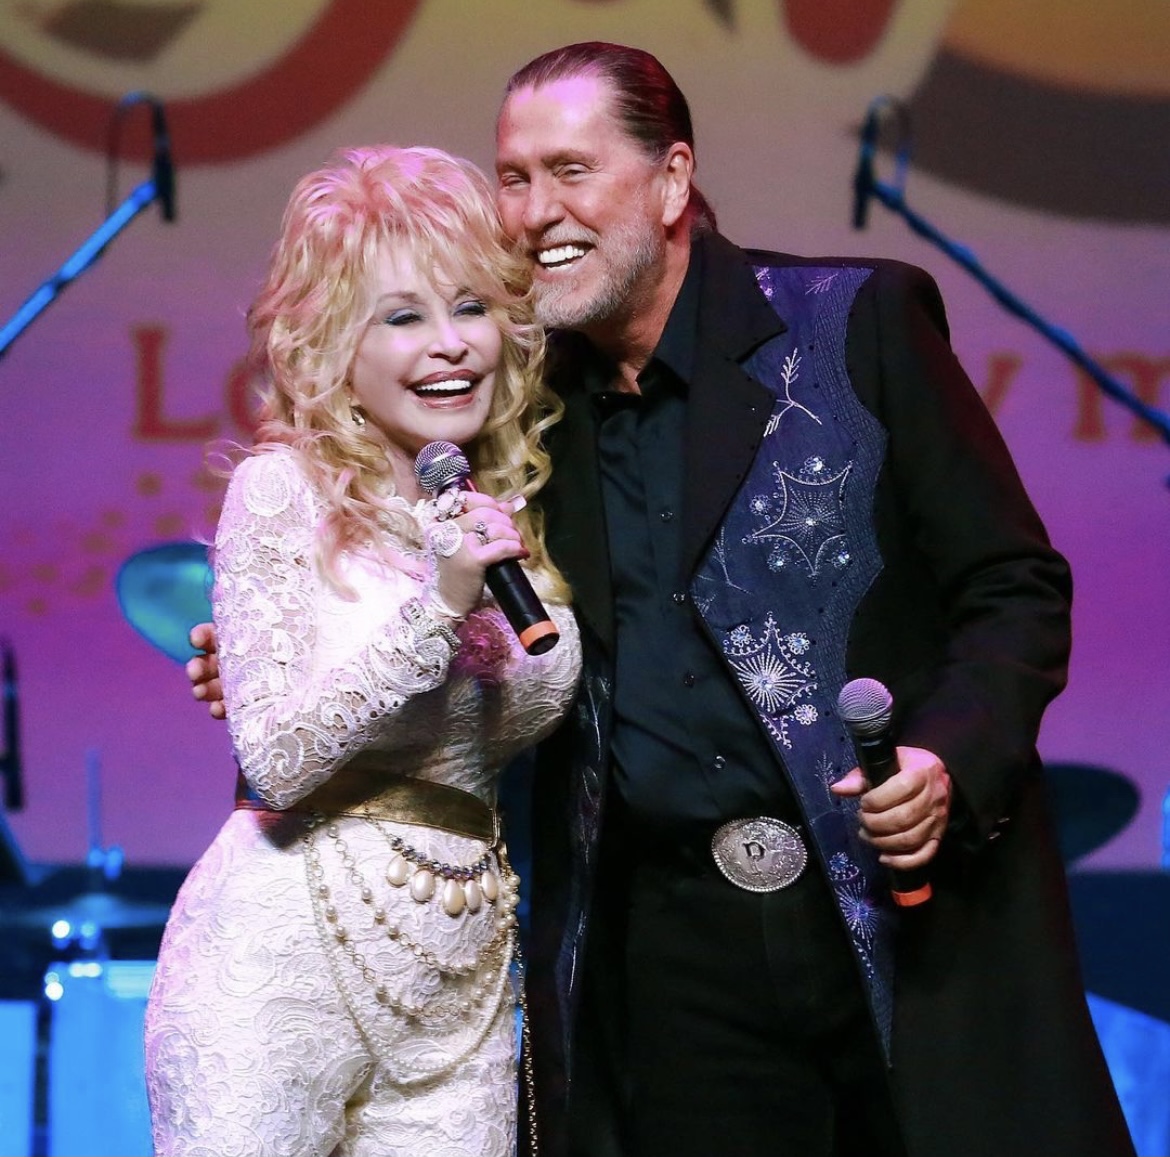 Dolly Parton Mourns The Loss of Younger Brother Randy